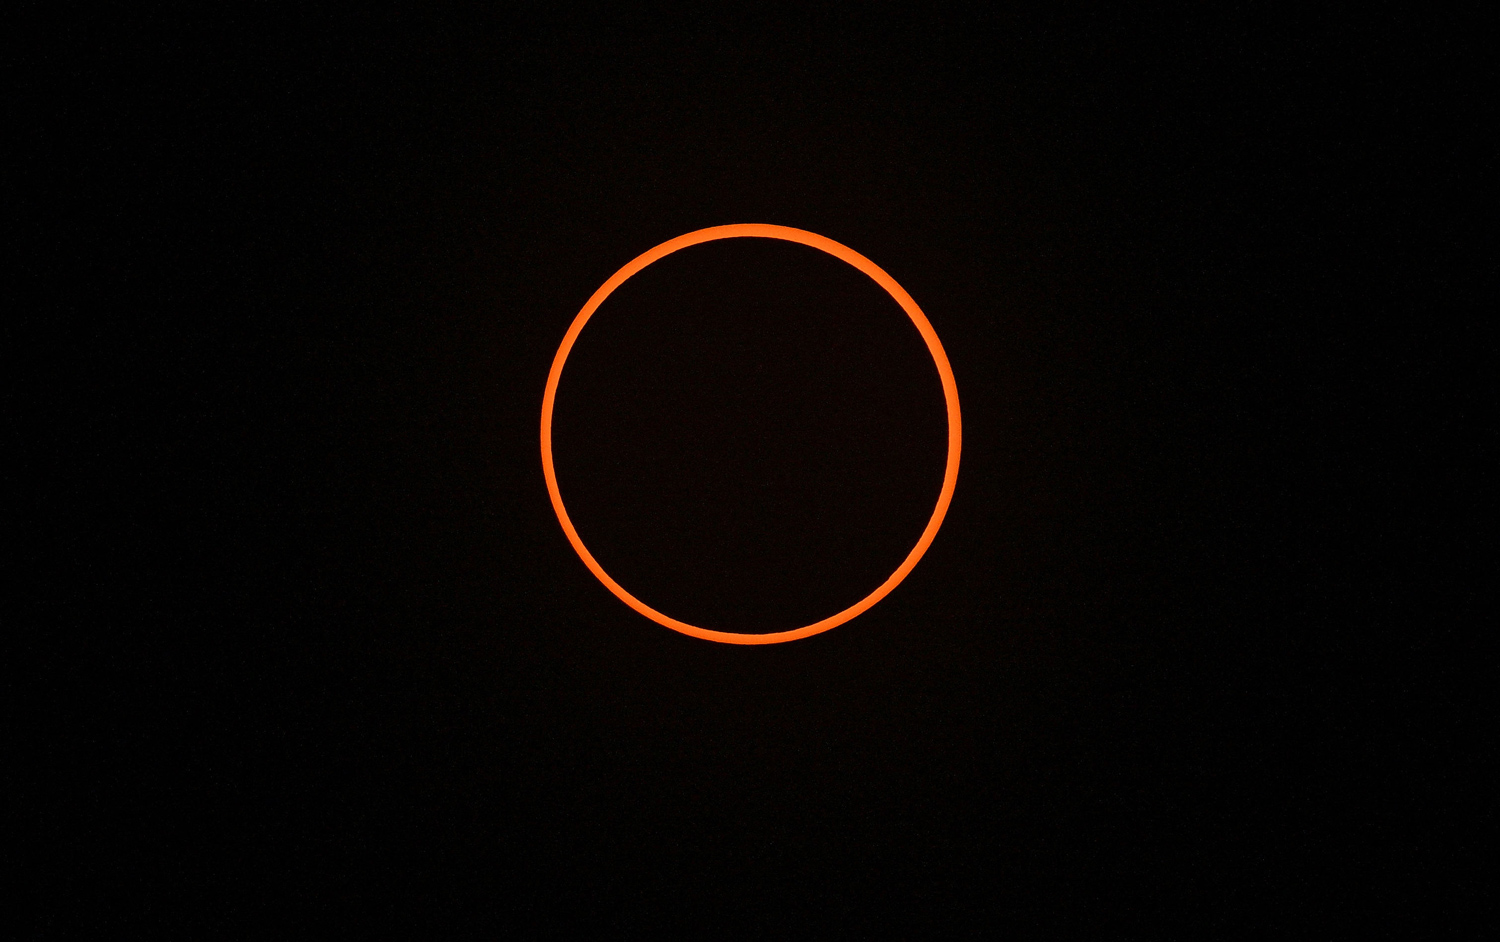 Rare annular solar eclipse today, known as a “ring of fire” - Darkhorse  Press